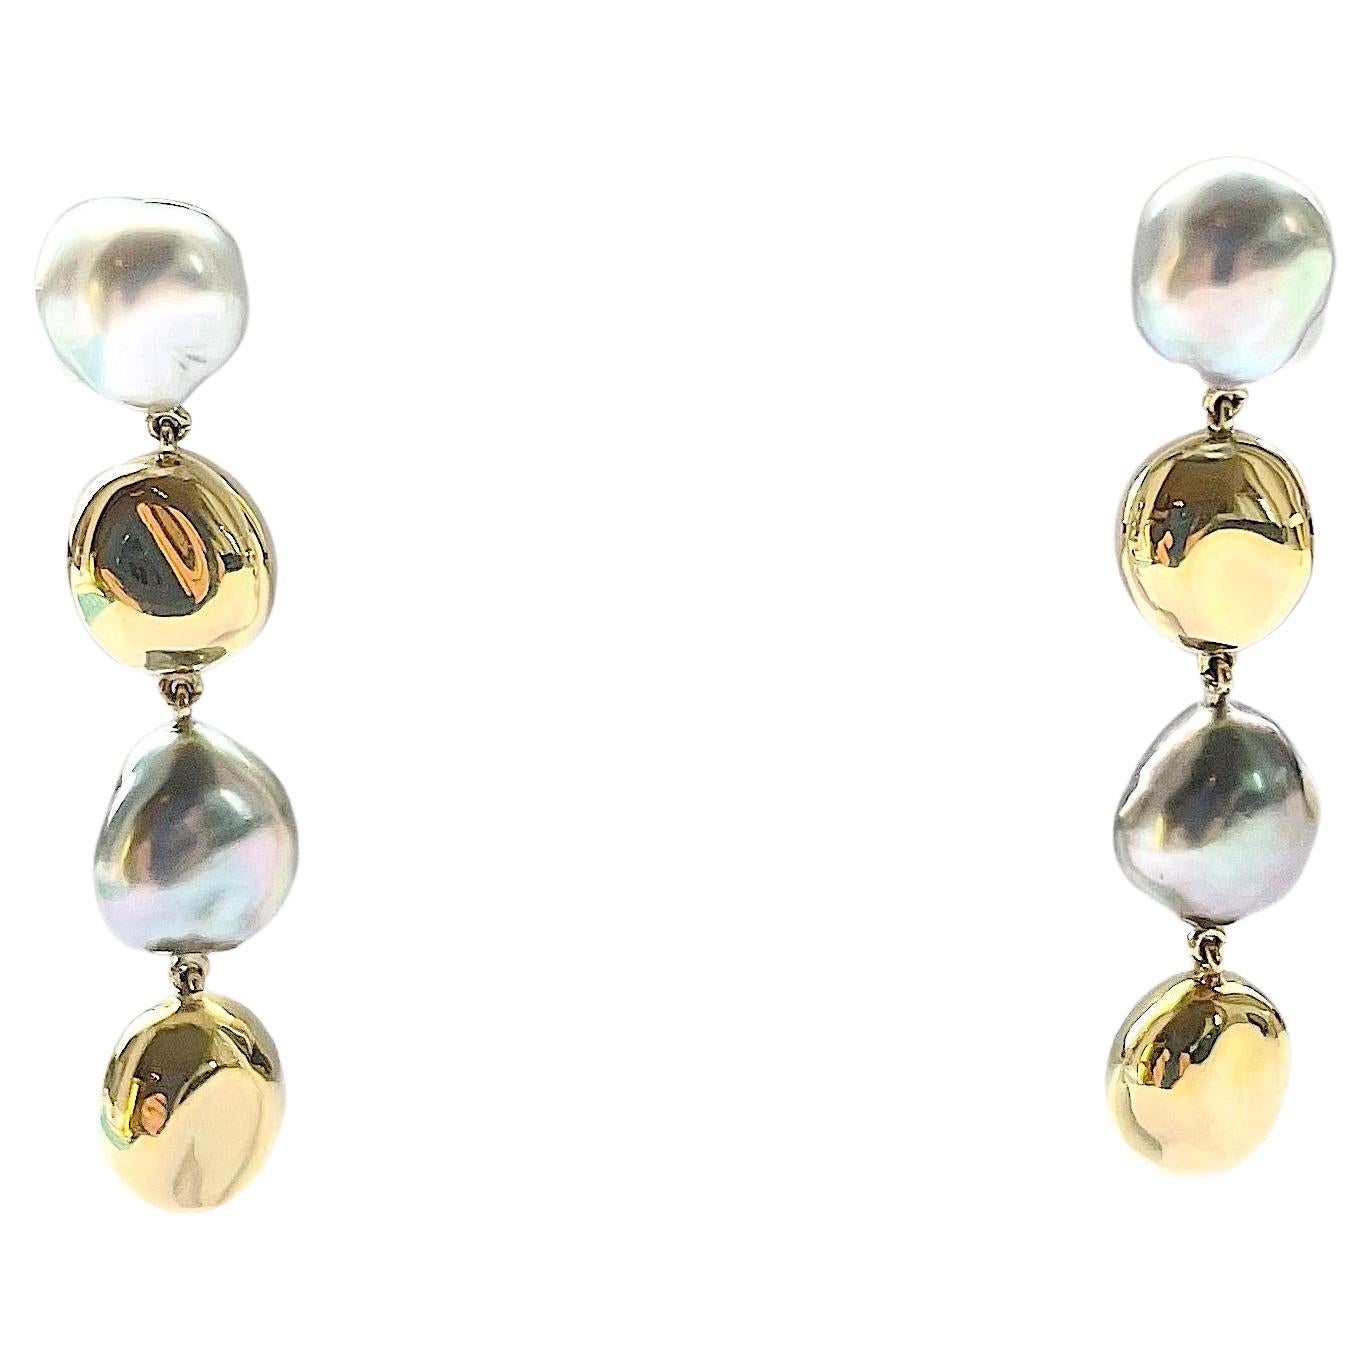 18kt Yellow Gold South Sea Baroque Gray Pearl and Gold bead Drop Earrings by A. Clunn

Beautiful Gray Pearl and Gold Bead alternating drop earring by Andrew Clunn. 

This elegant versatile earring with Four alternating South Sea Baroque Pearls